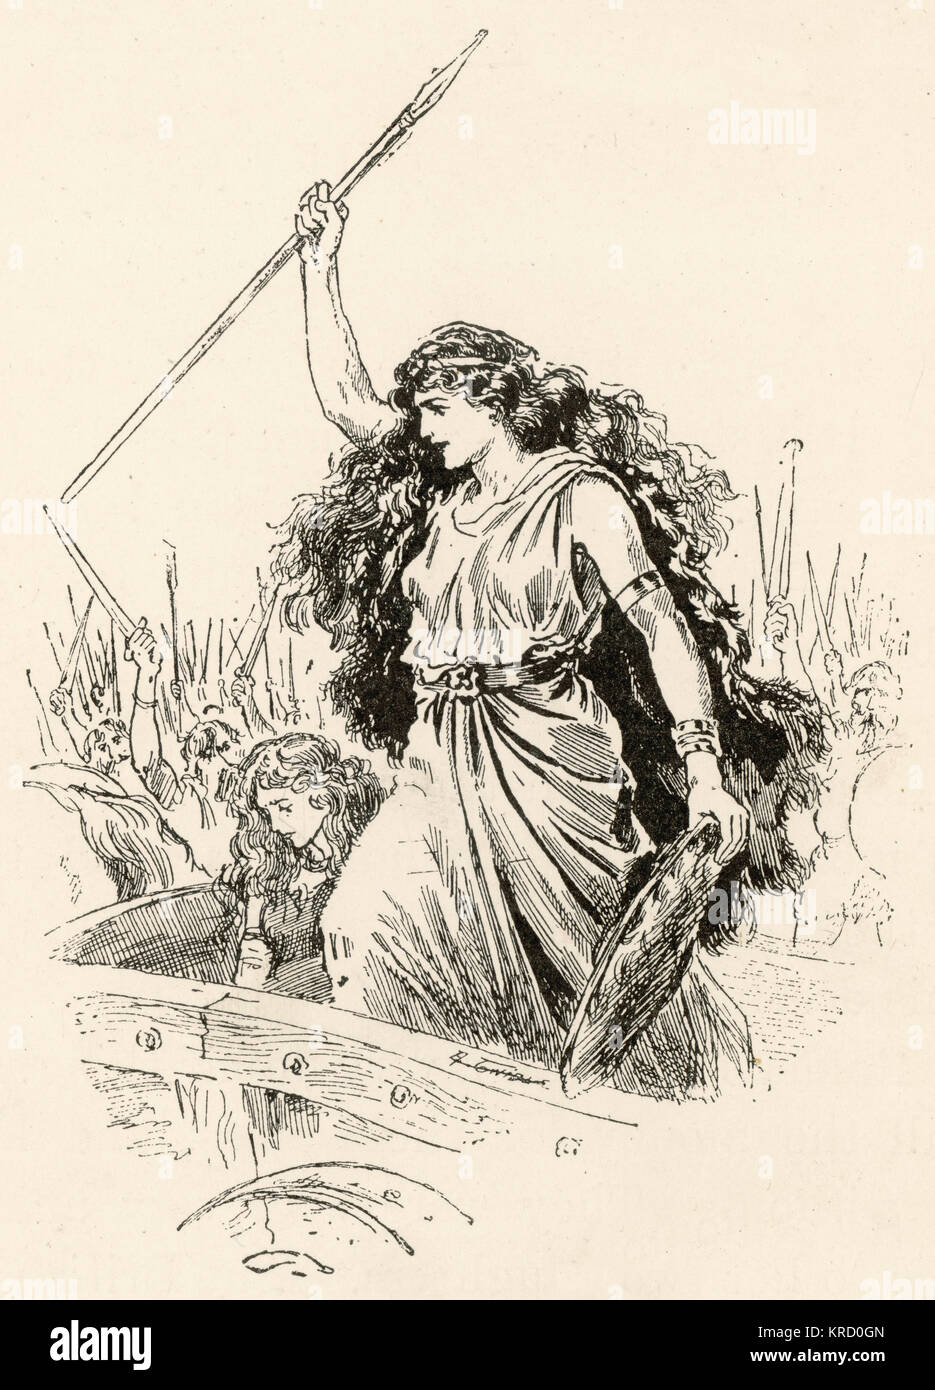 Queen Boudica of the Iceni Tribe. Commanded a combined army of British tribes which rose up and sacked Camulodunum (Colchester), London (Londinium) and St Albans (Verulamium) before finally being defeated by Suetonius' troops at the Battle of Watling Street.     Date: circa 60 AD Stock Photo